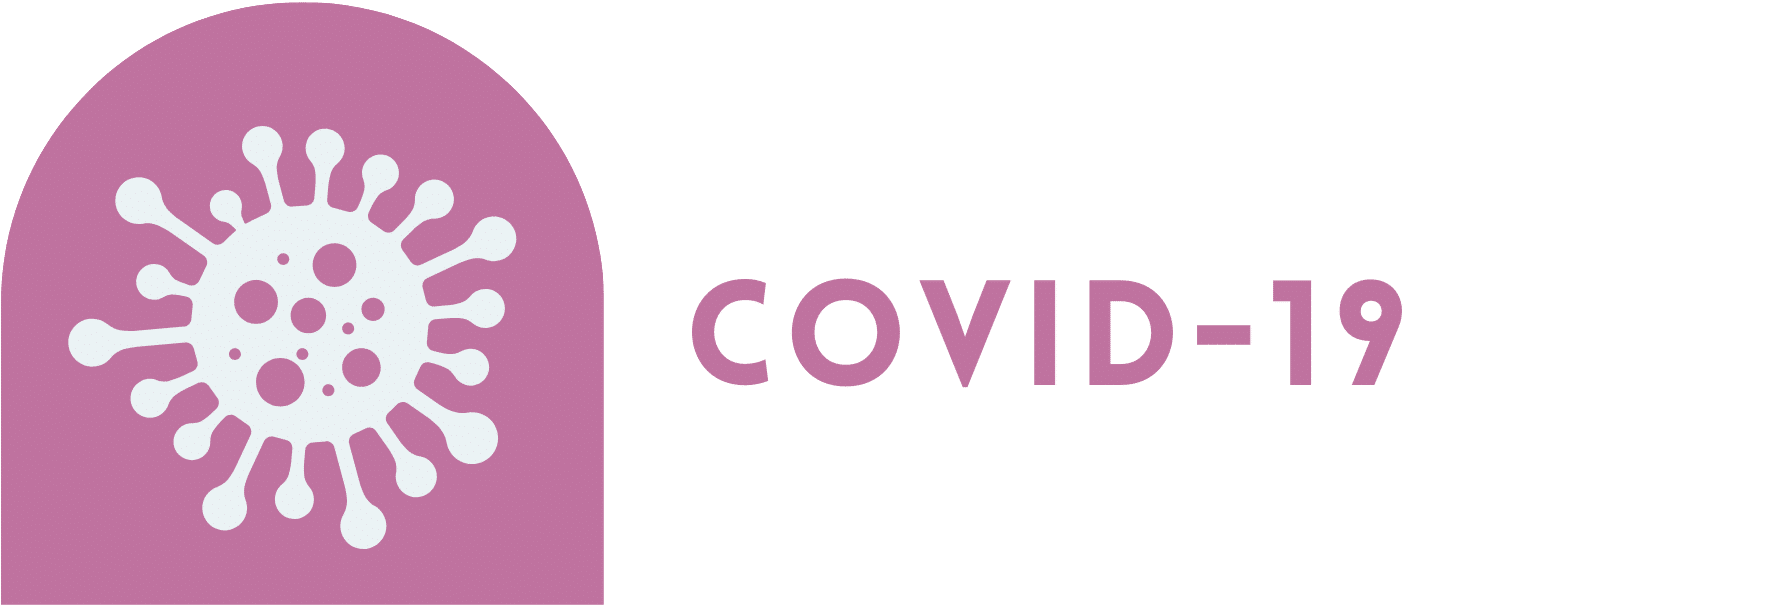 Text reading "COVID-19" next to image of a virus molecule